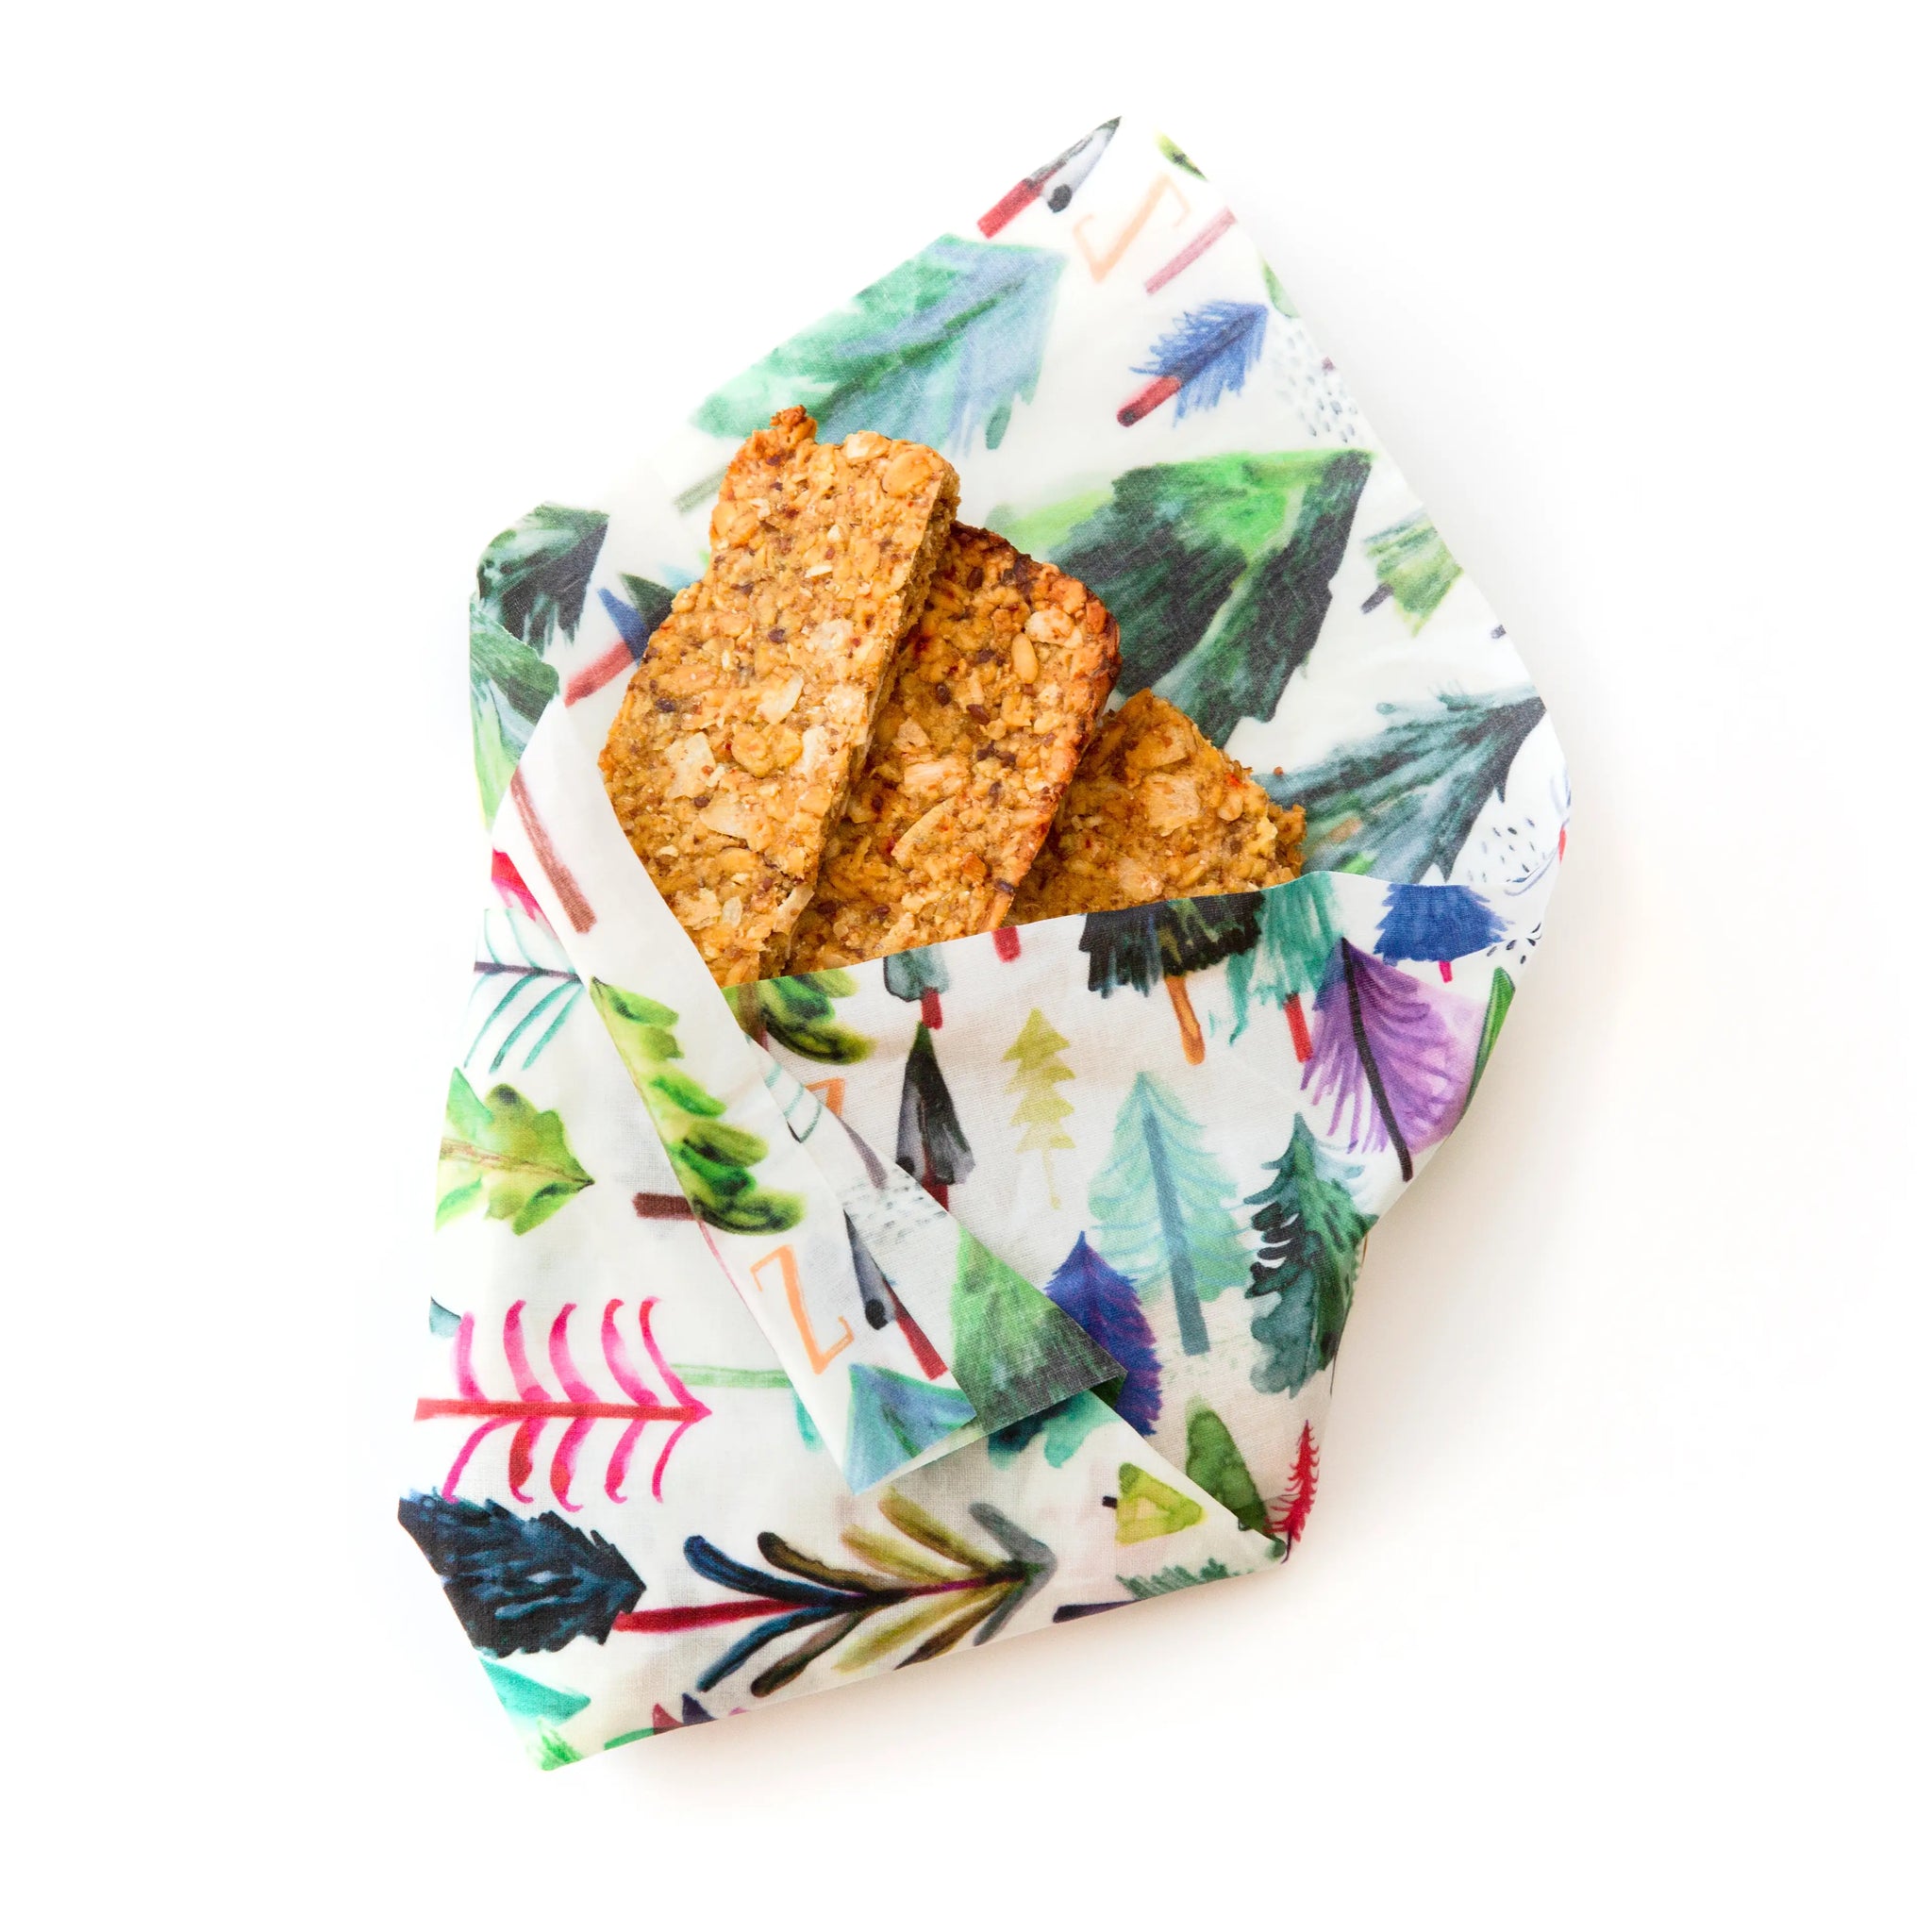 Reusable Beeswax Wrap 3 pc. Multi-Pack